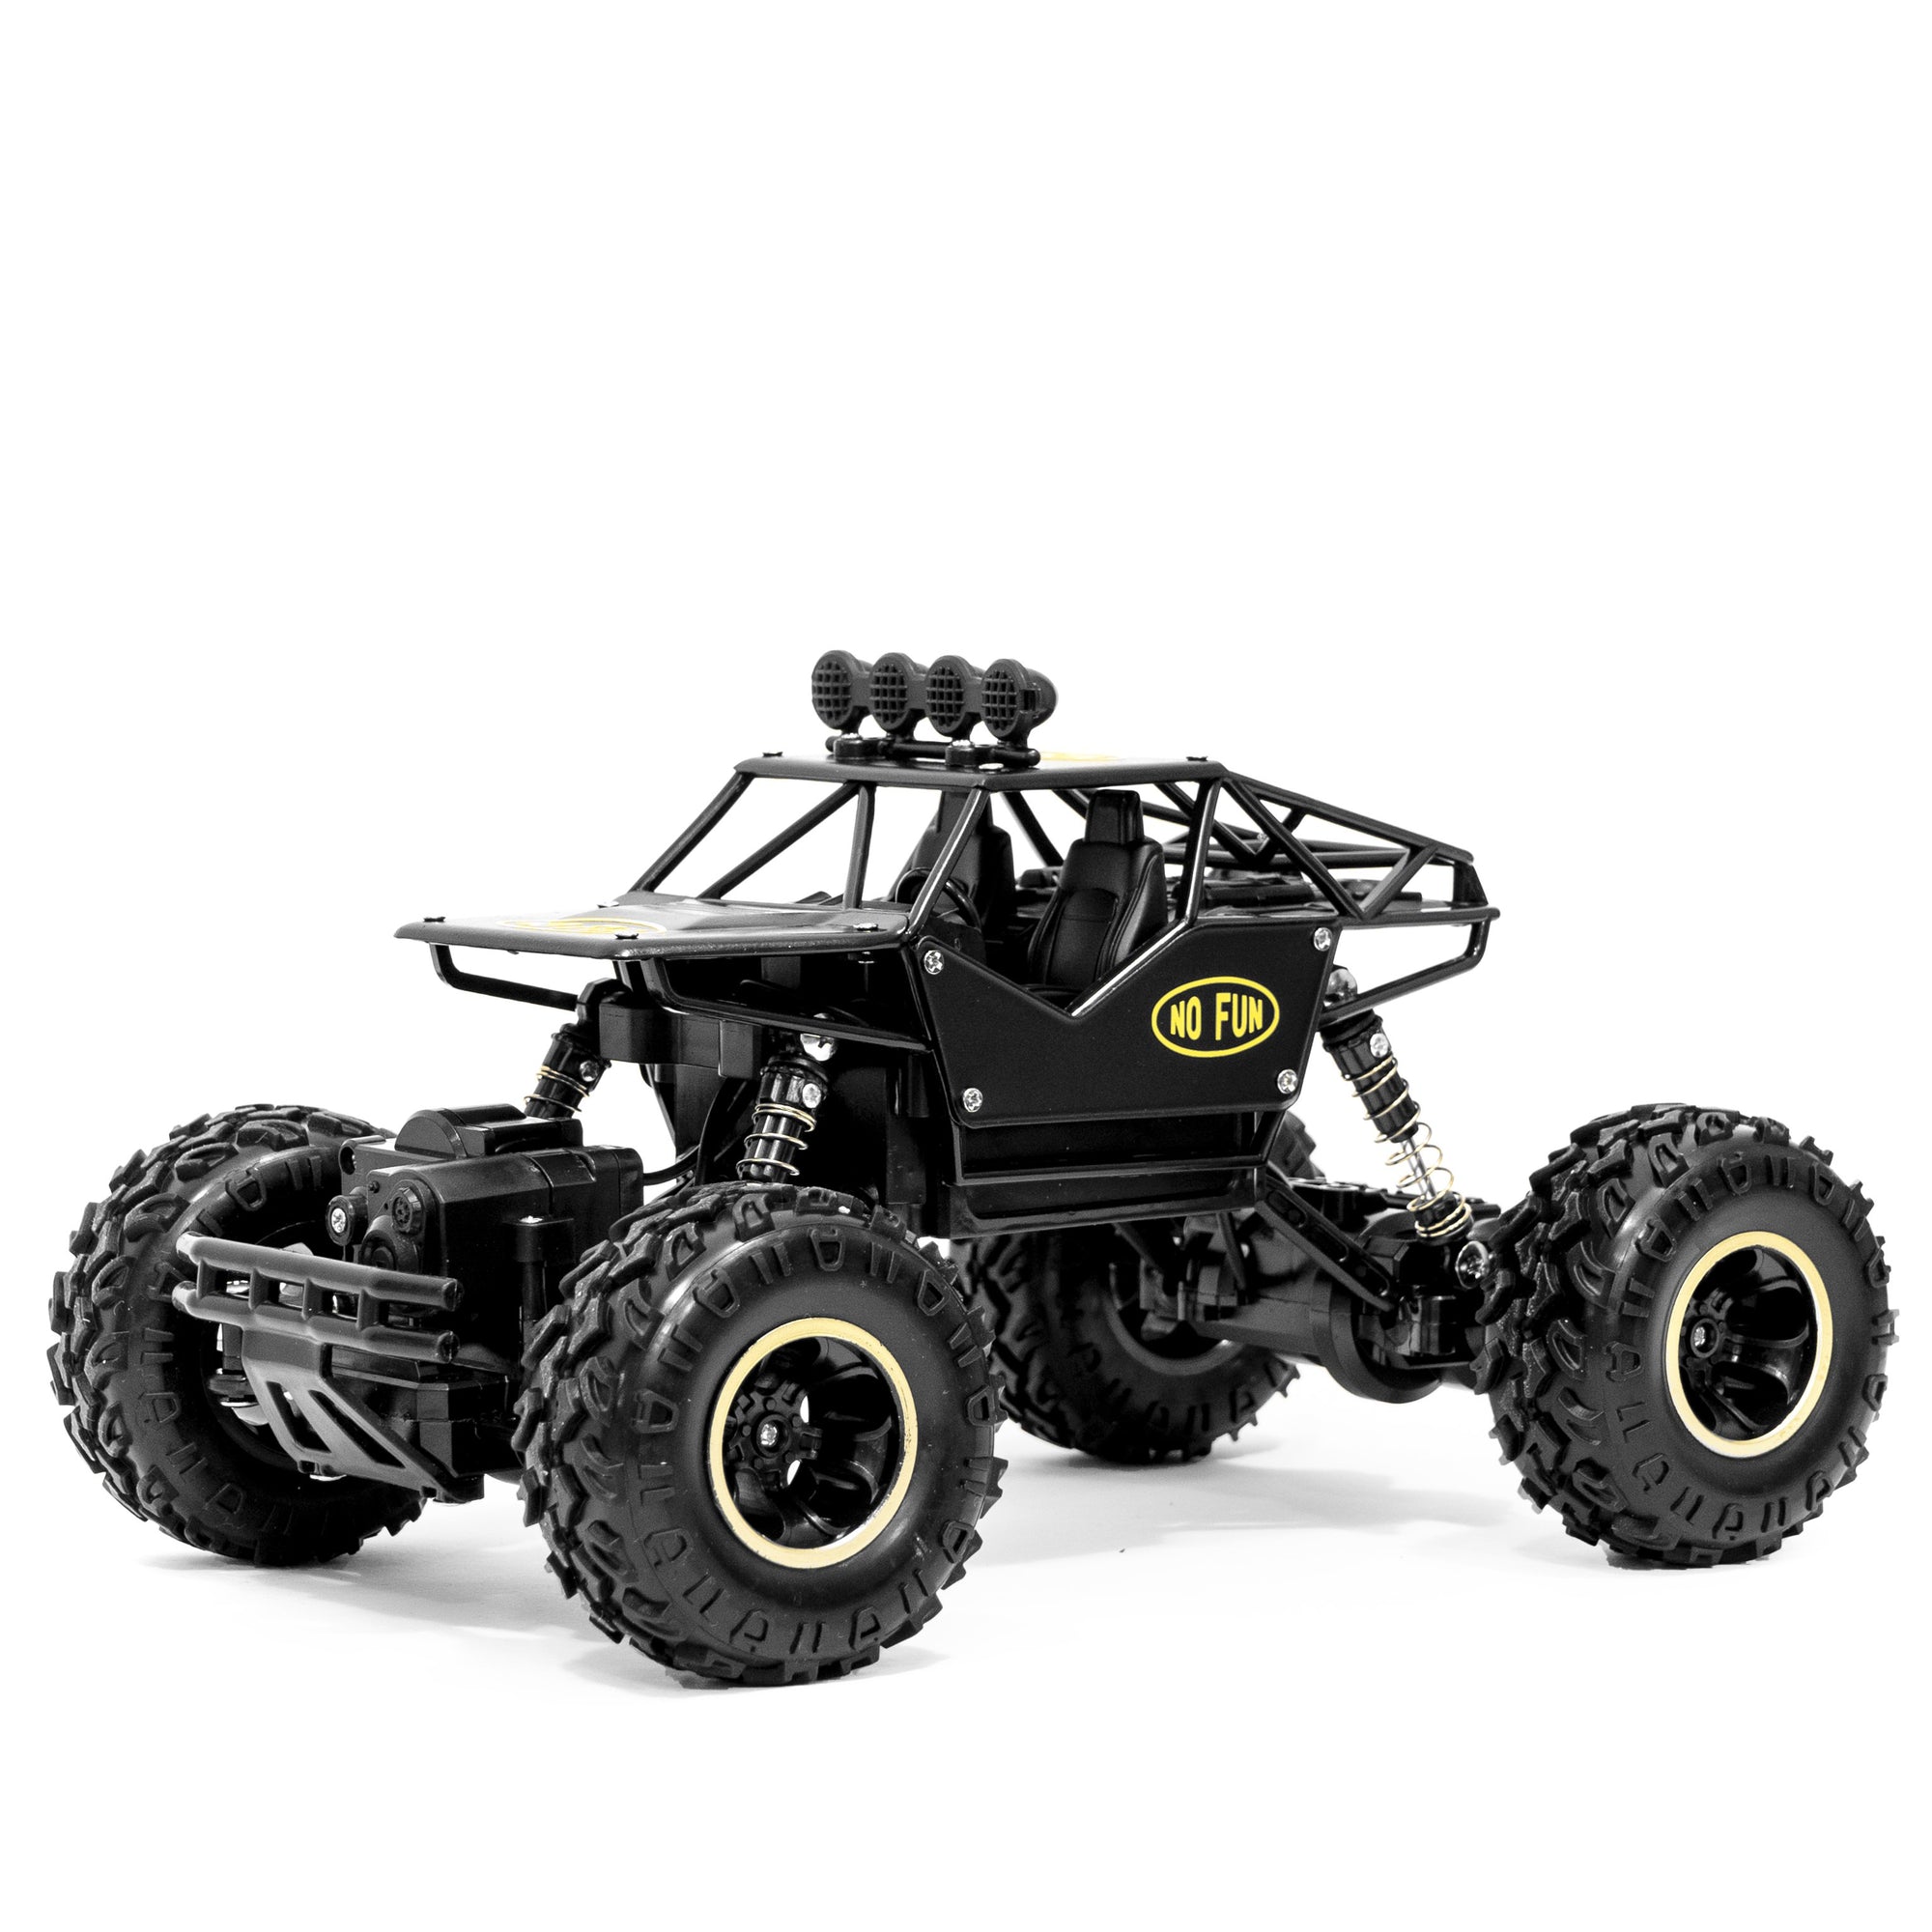 A WICKED RC car from No Fun®. Remote controlled, and oversized. Built for any terrain.